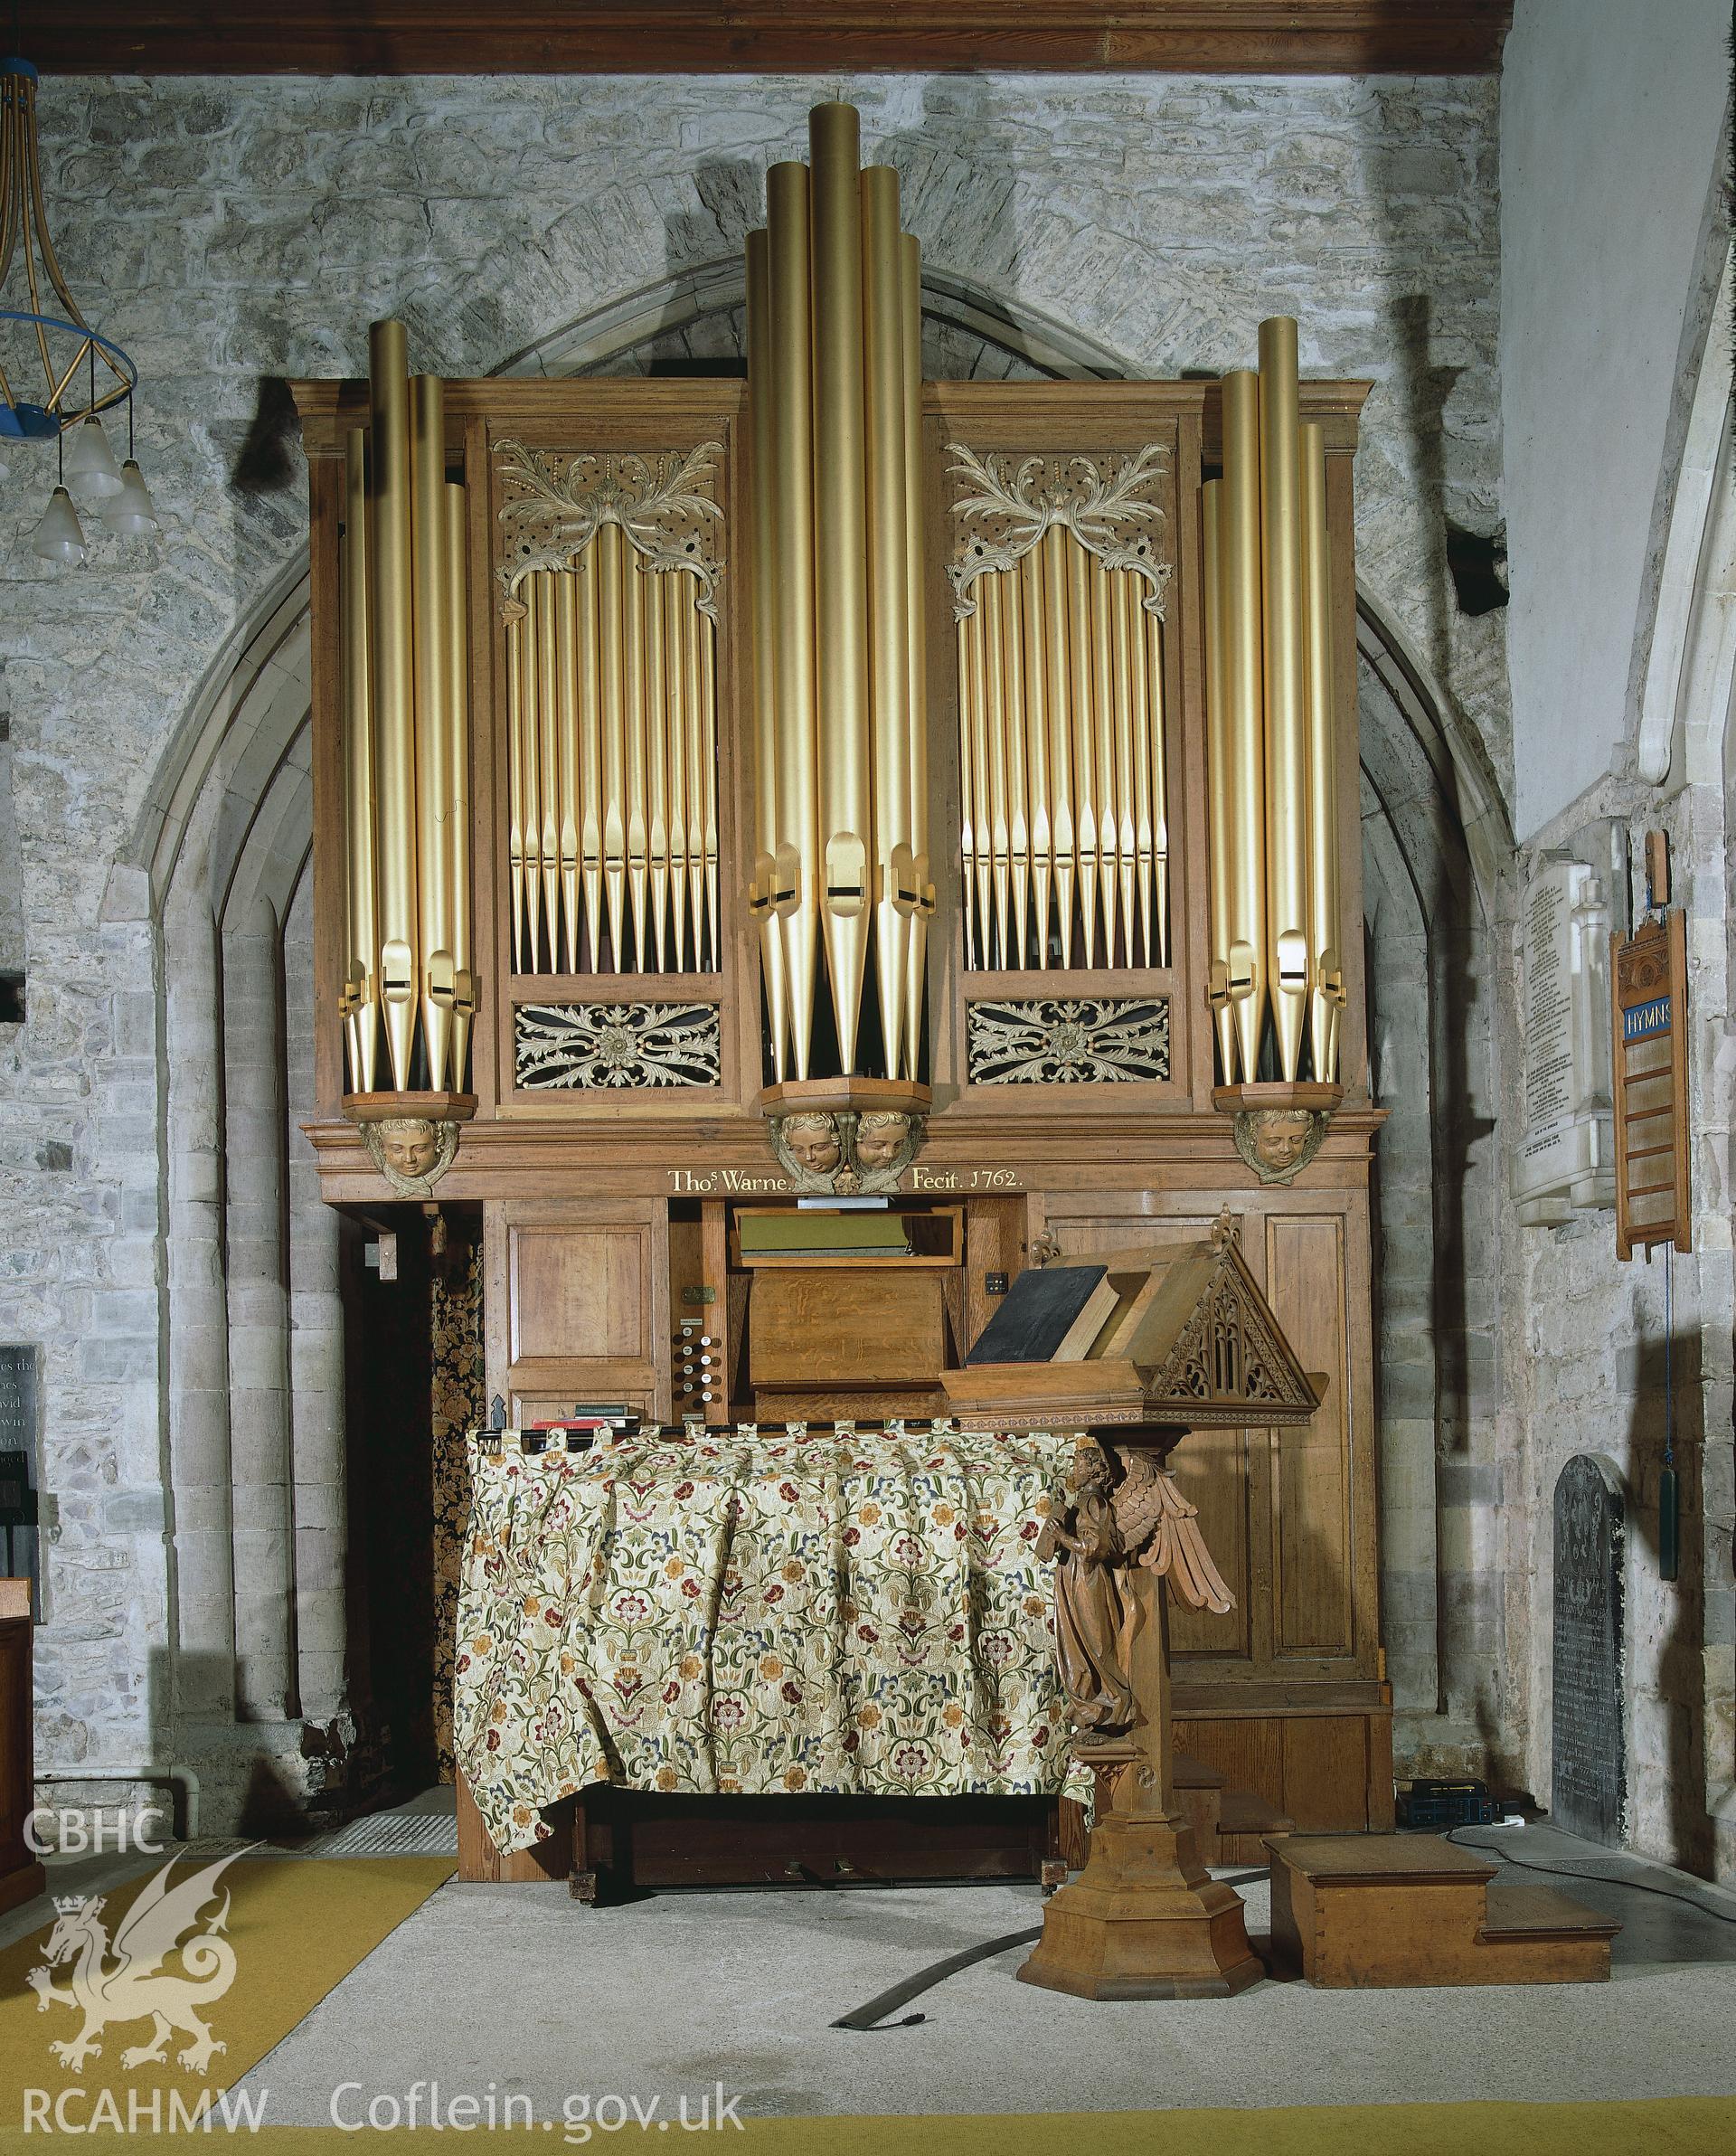 RCAHMW colour transparency showing view of the organ case at St Mary's Church, Kidwelly.